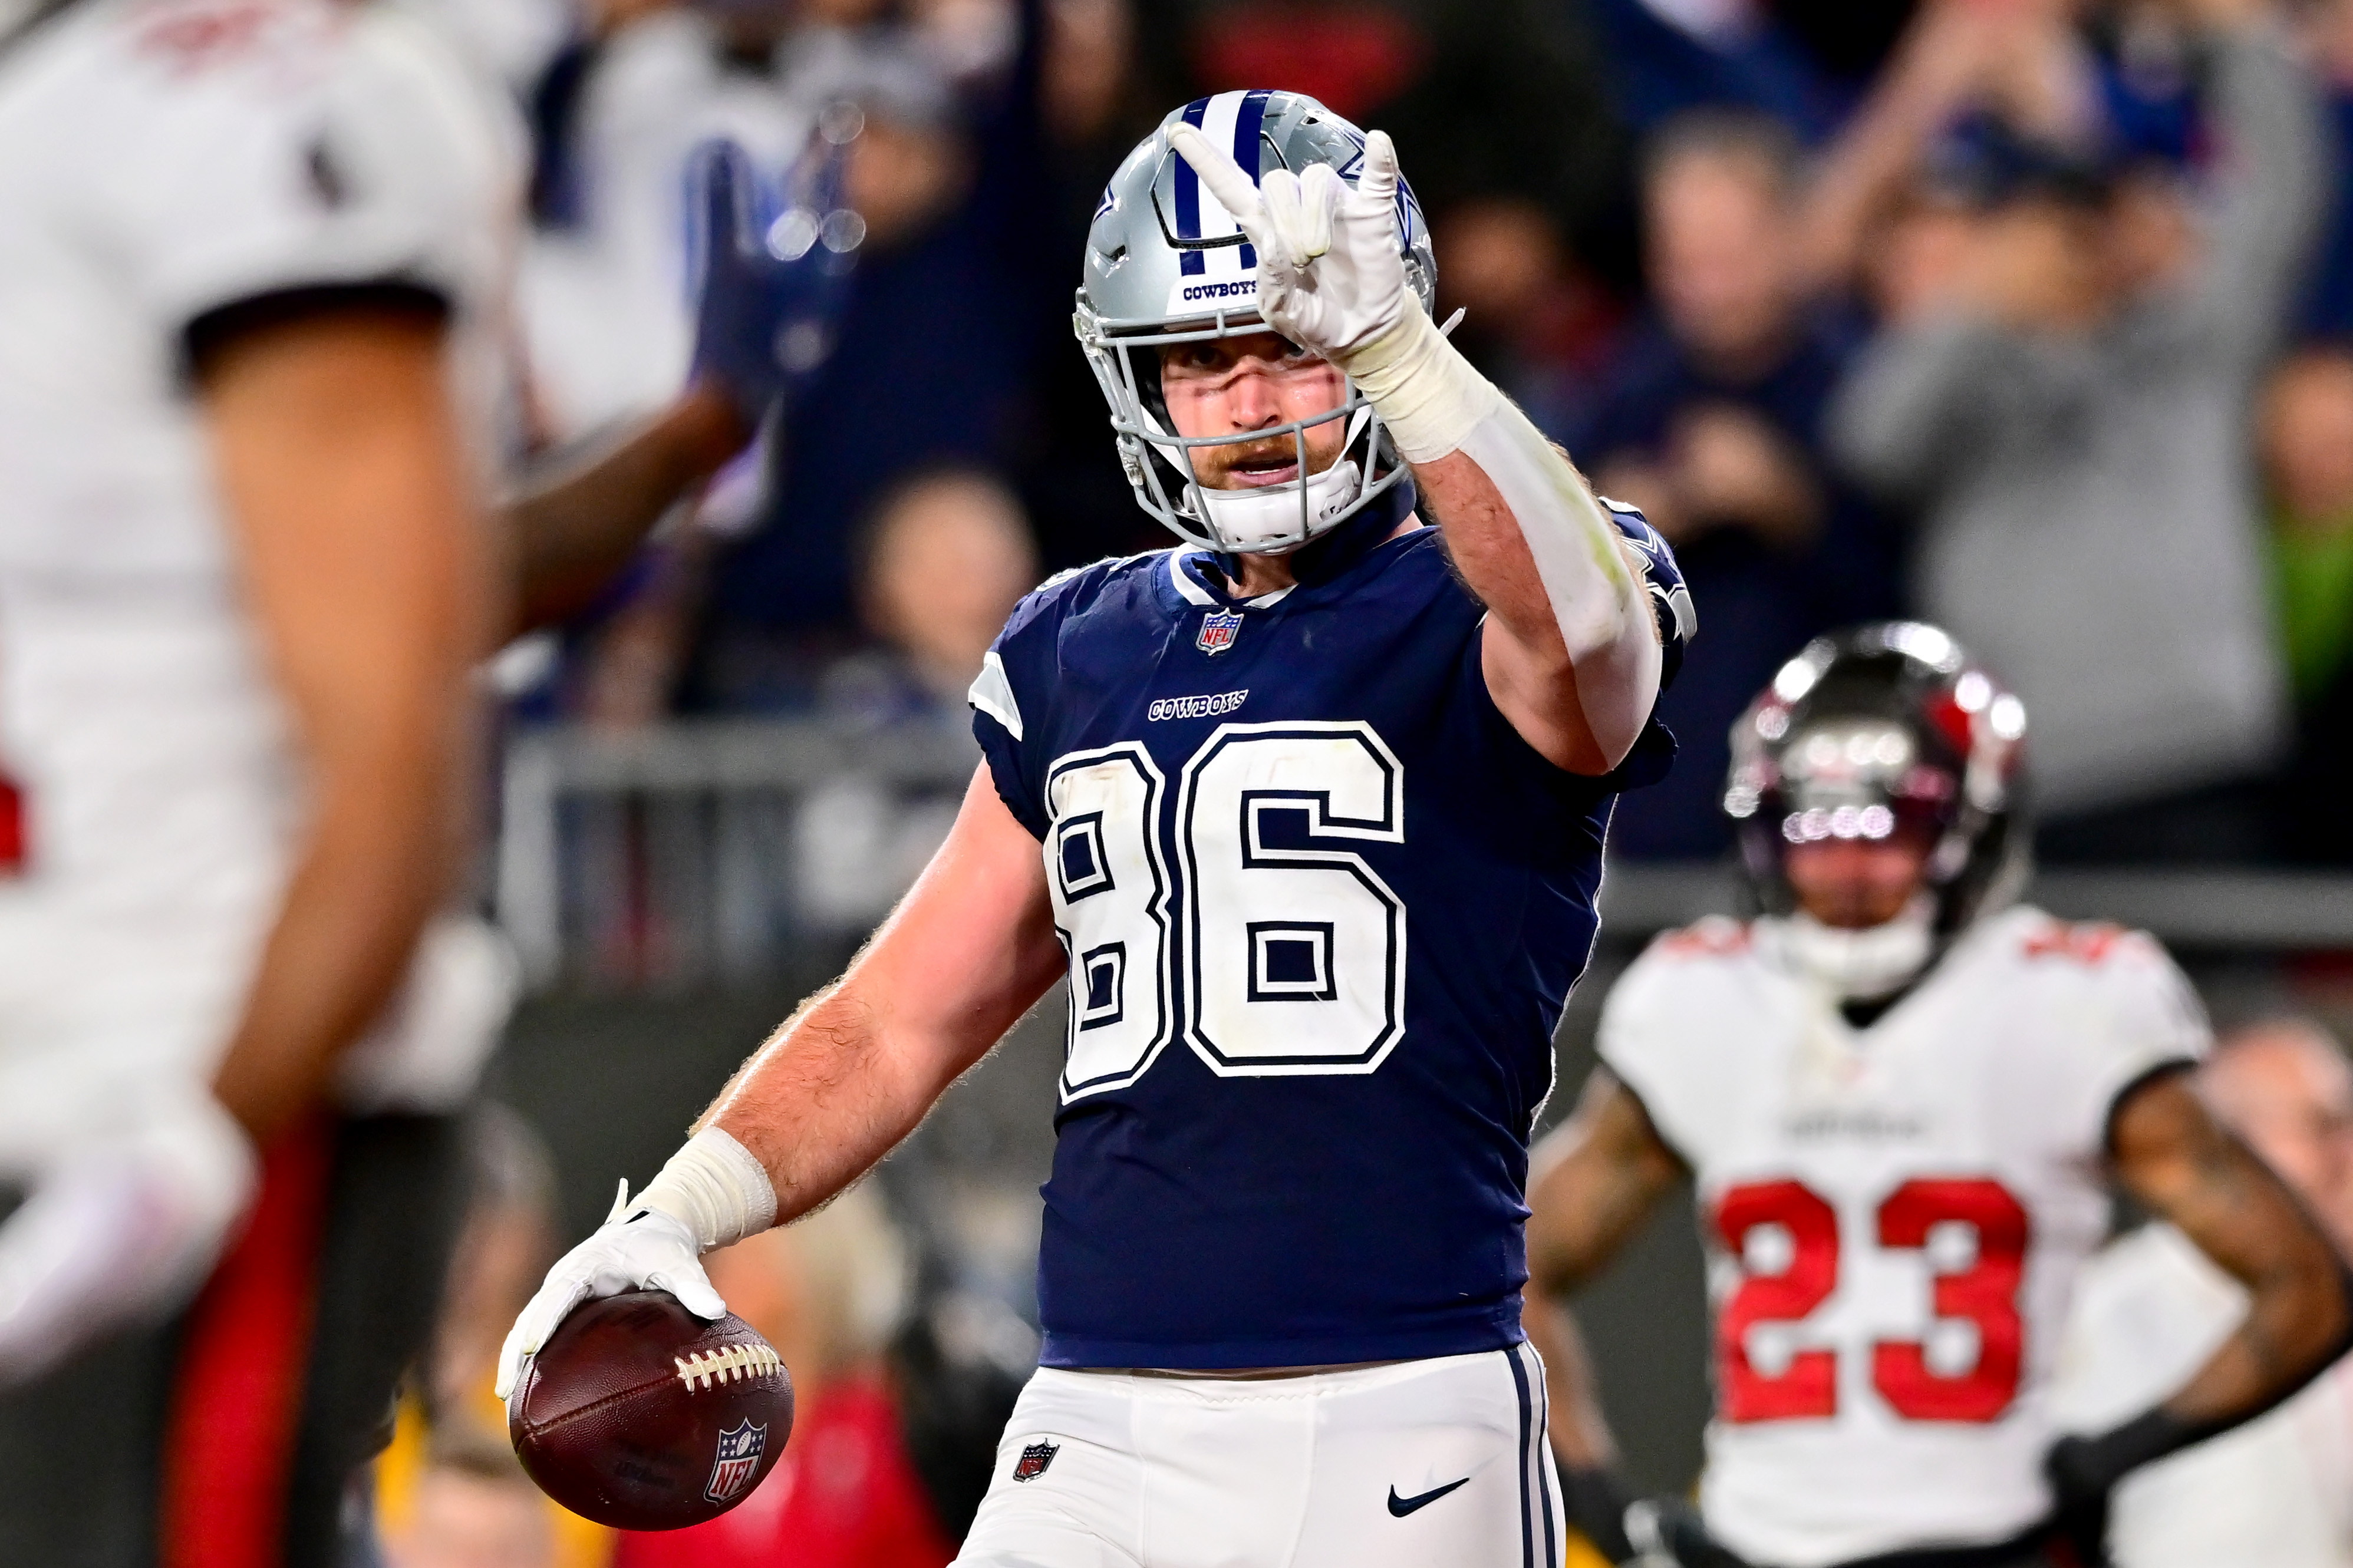 TAMPA, FLORIDA - JANUARY 16: Dalton Schultz #86 of the Dallas Cowboys celebrates after scoring a touchdown against the Tampa Bay Buccaneers during the second quarter in the NFC Wild Card playoff game at Raymond James Stadium on January 16, 2023 in Tampa, Florida.